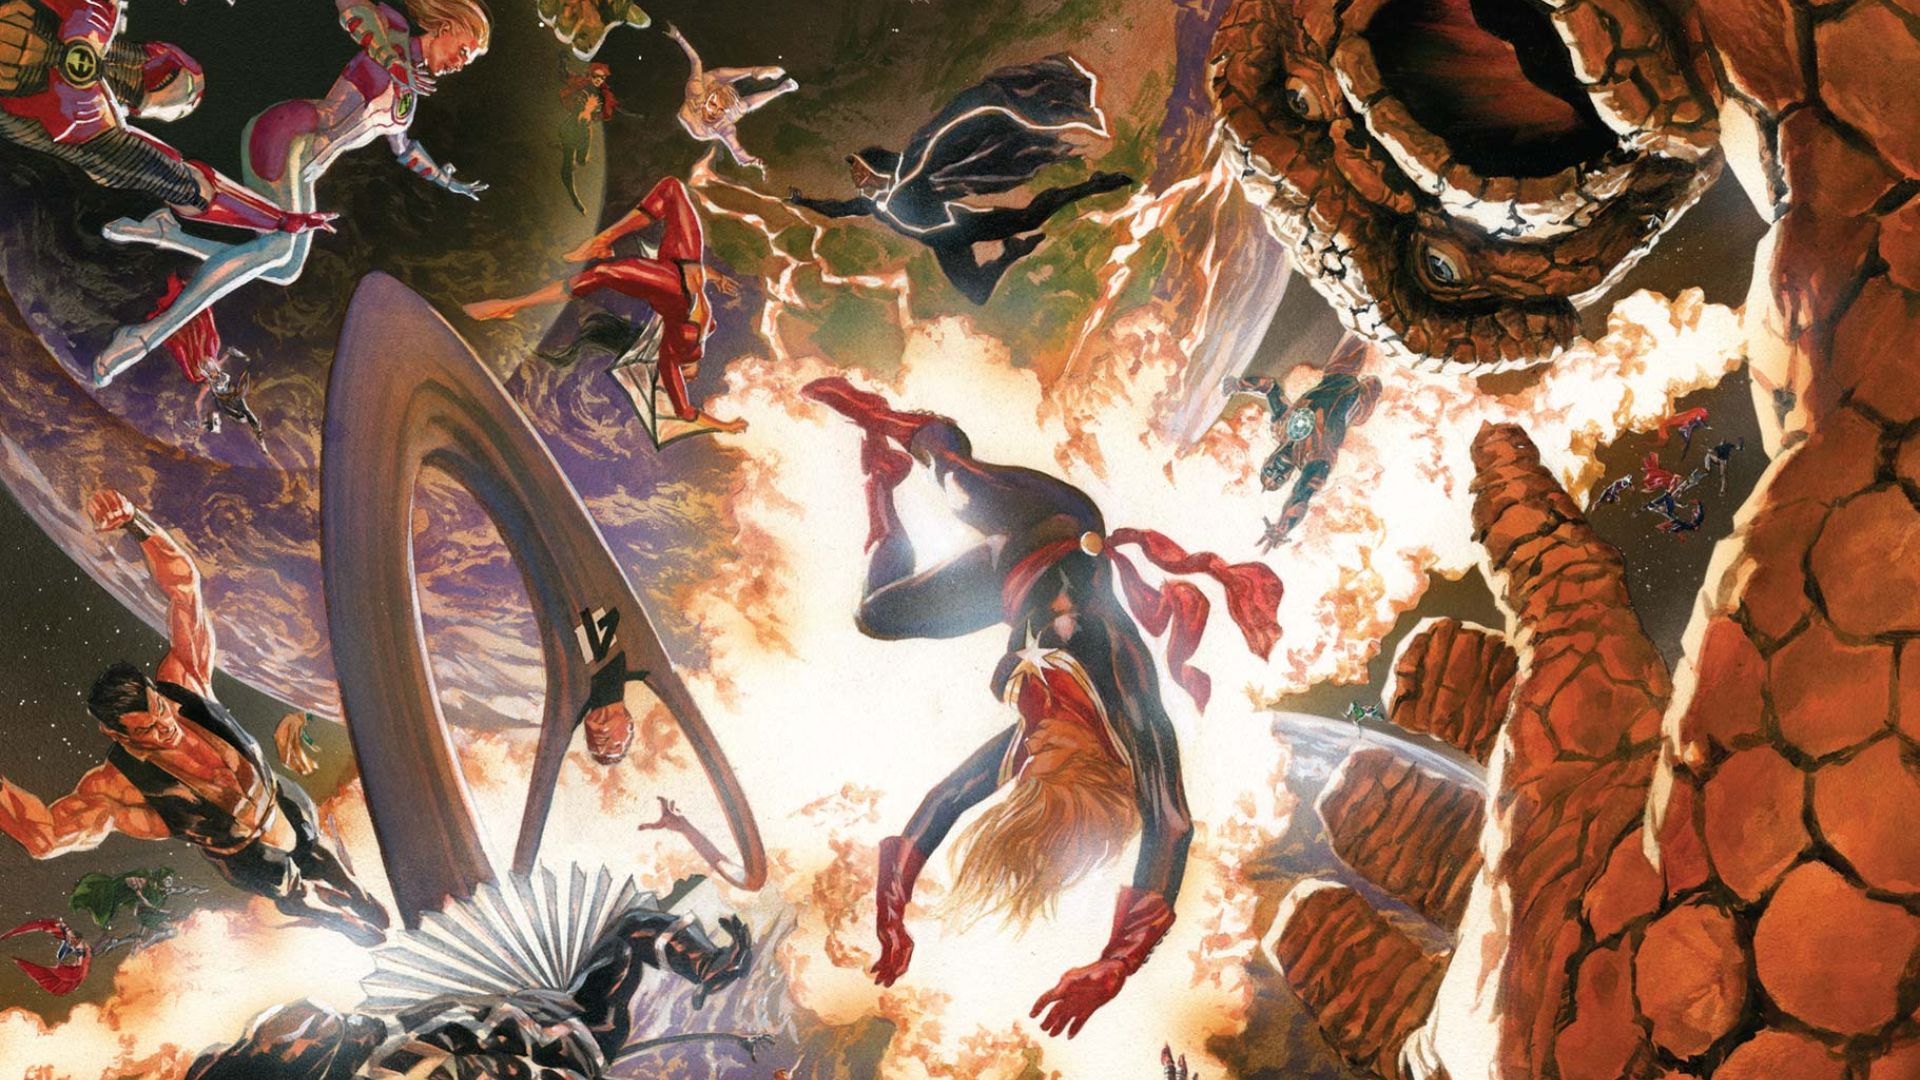 Marvel heroes duke it out on the cover of Secret Wars #1 (2015).